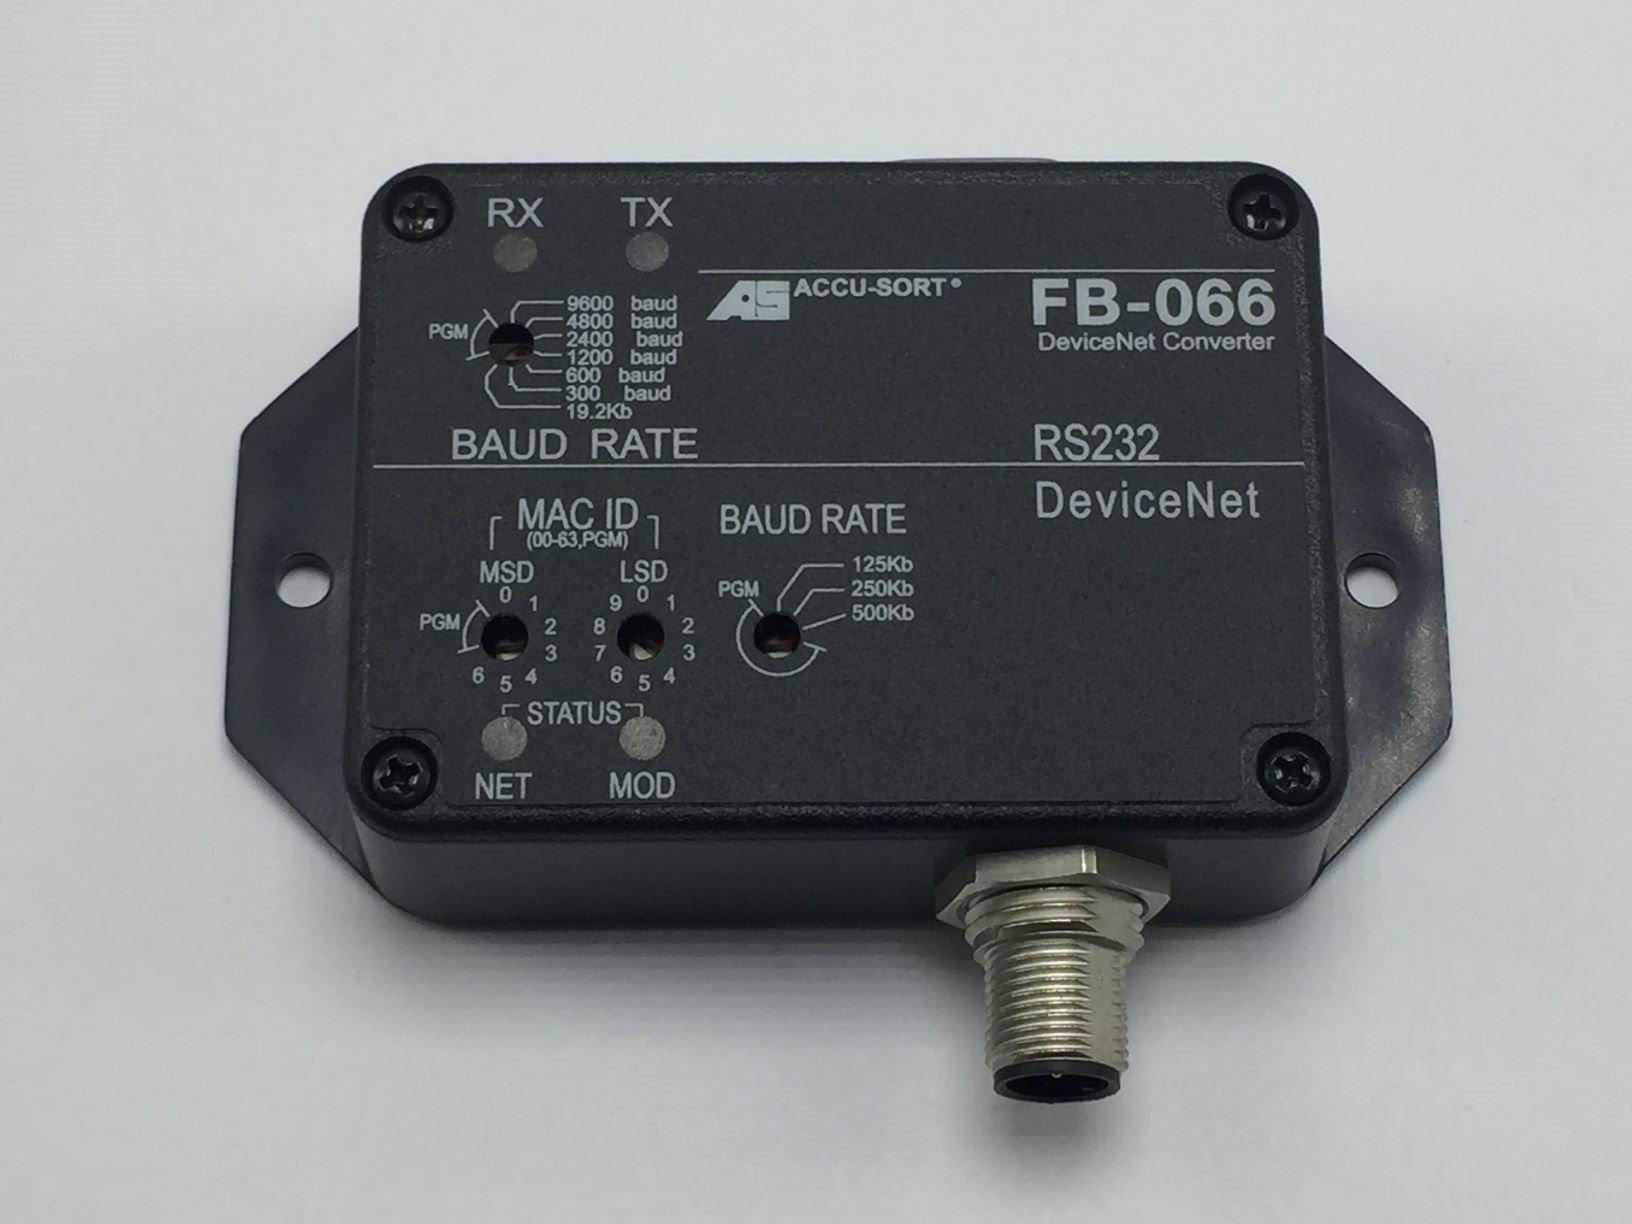   FB-066 DEVICENET CONVERTER TO RS232 INTERFACE 